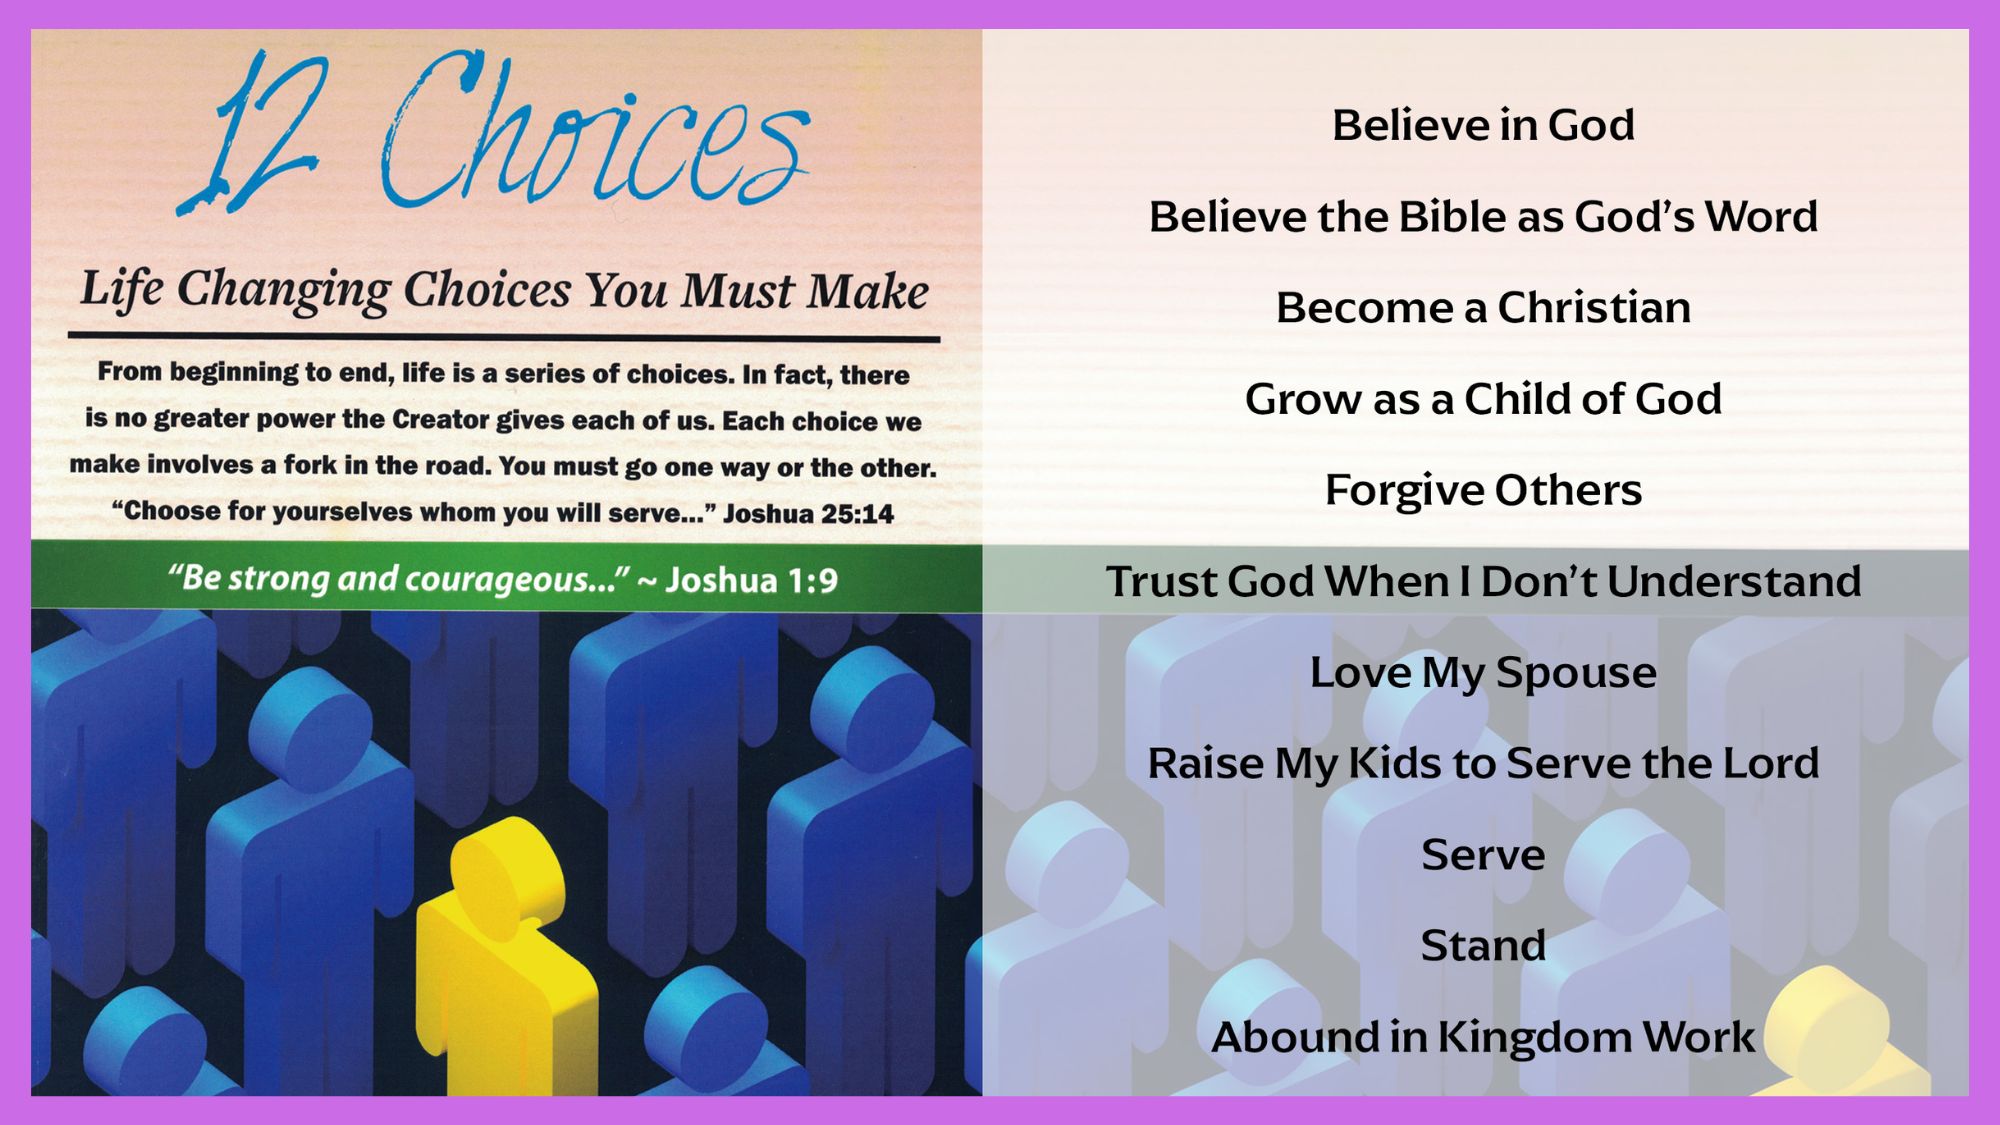 12 Choices - Life Changing Choices You Must Make - Choice # 1 Believe in God